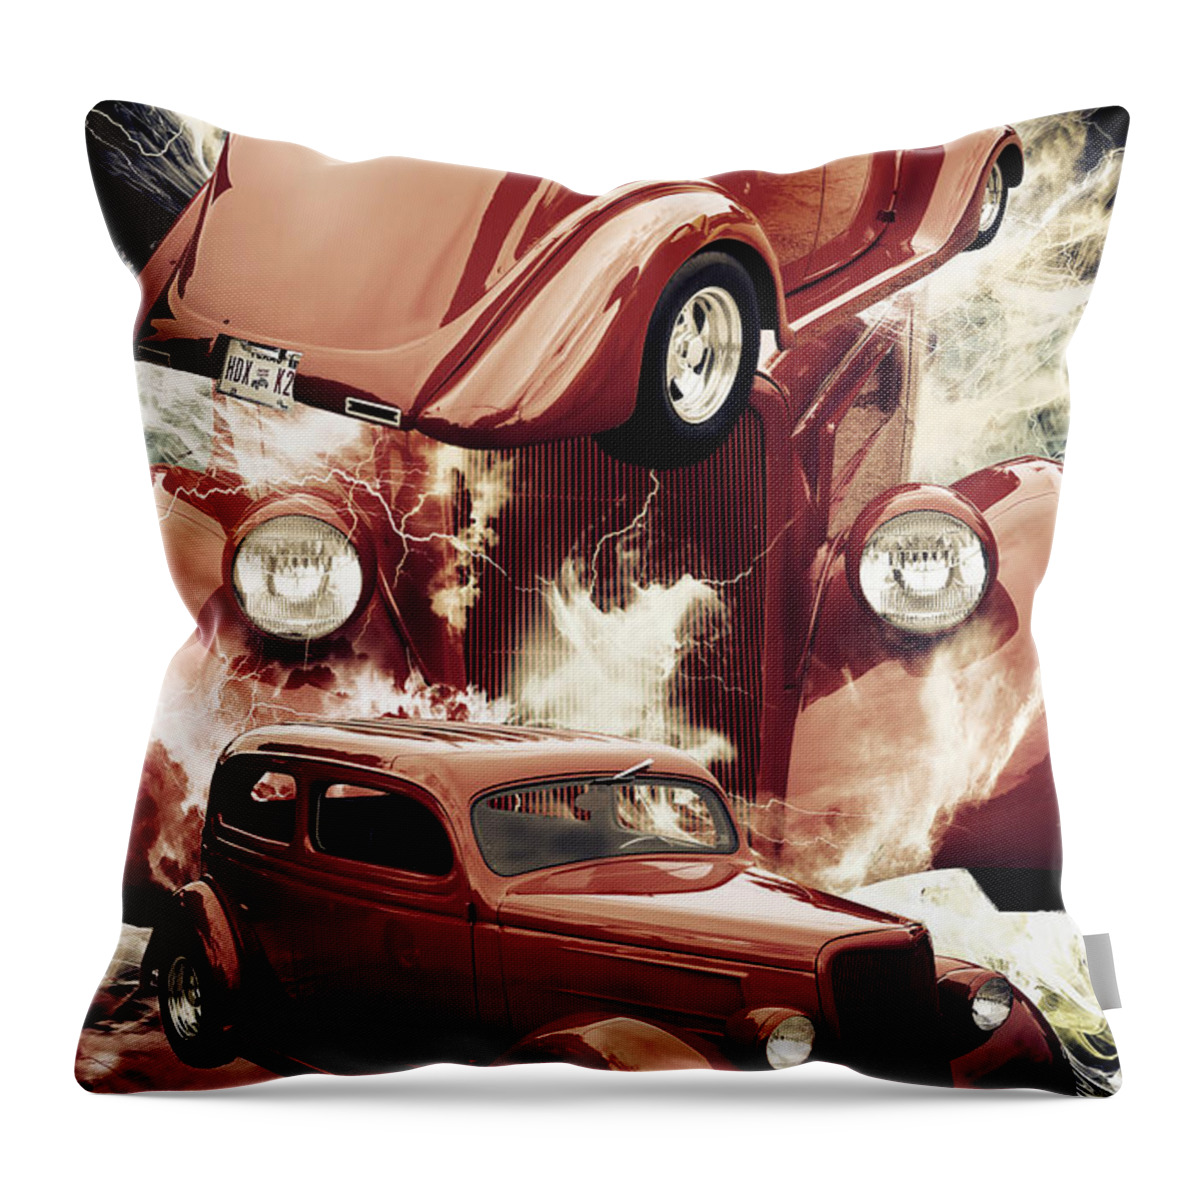 1935 Ford Throw Pillow featuring the photograph 1935 Ford Classic Red Car Photograph 7157.02 by M K Miller